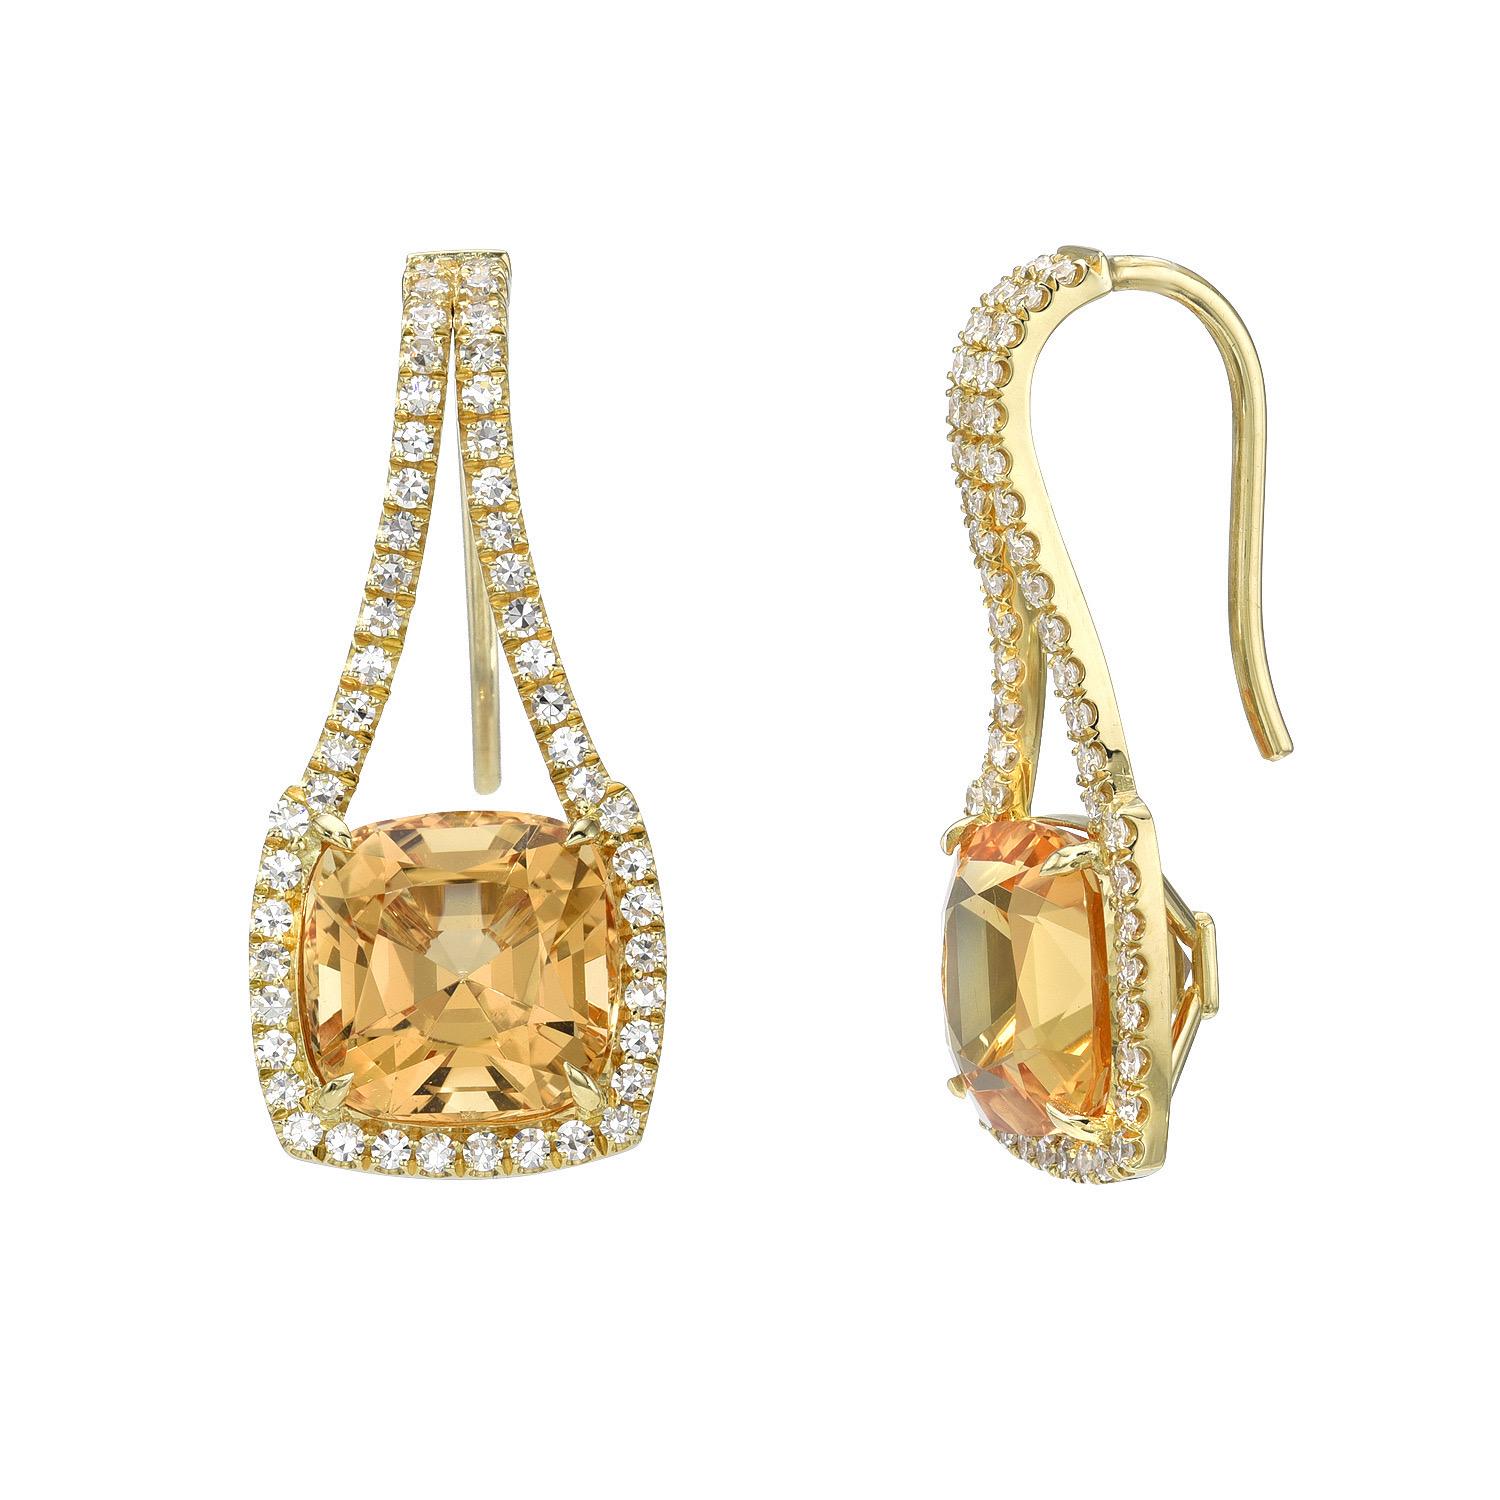 Contemporary Imperial Topaz Earrings 8.81 Carat Cushions For Sale